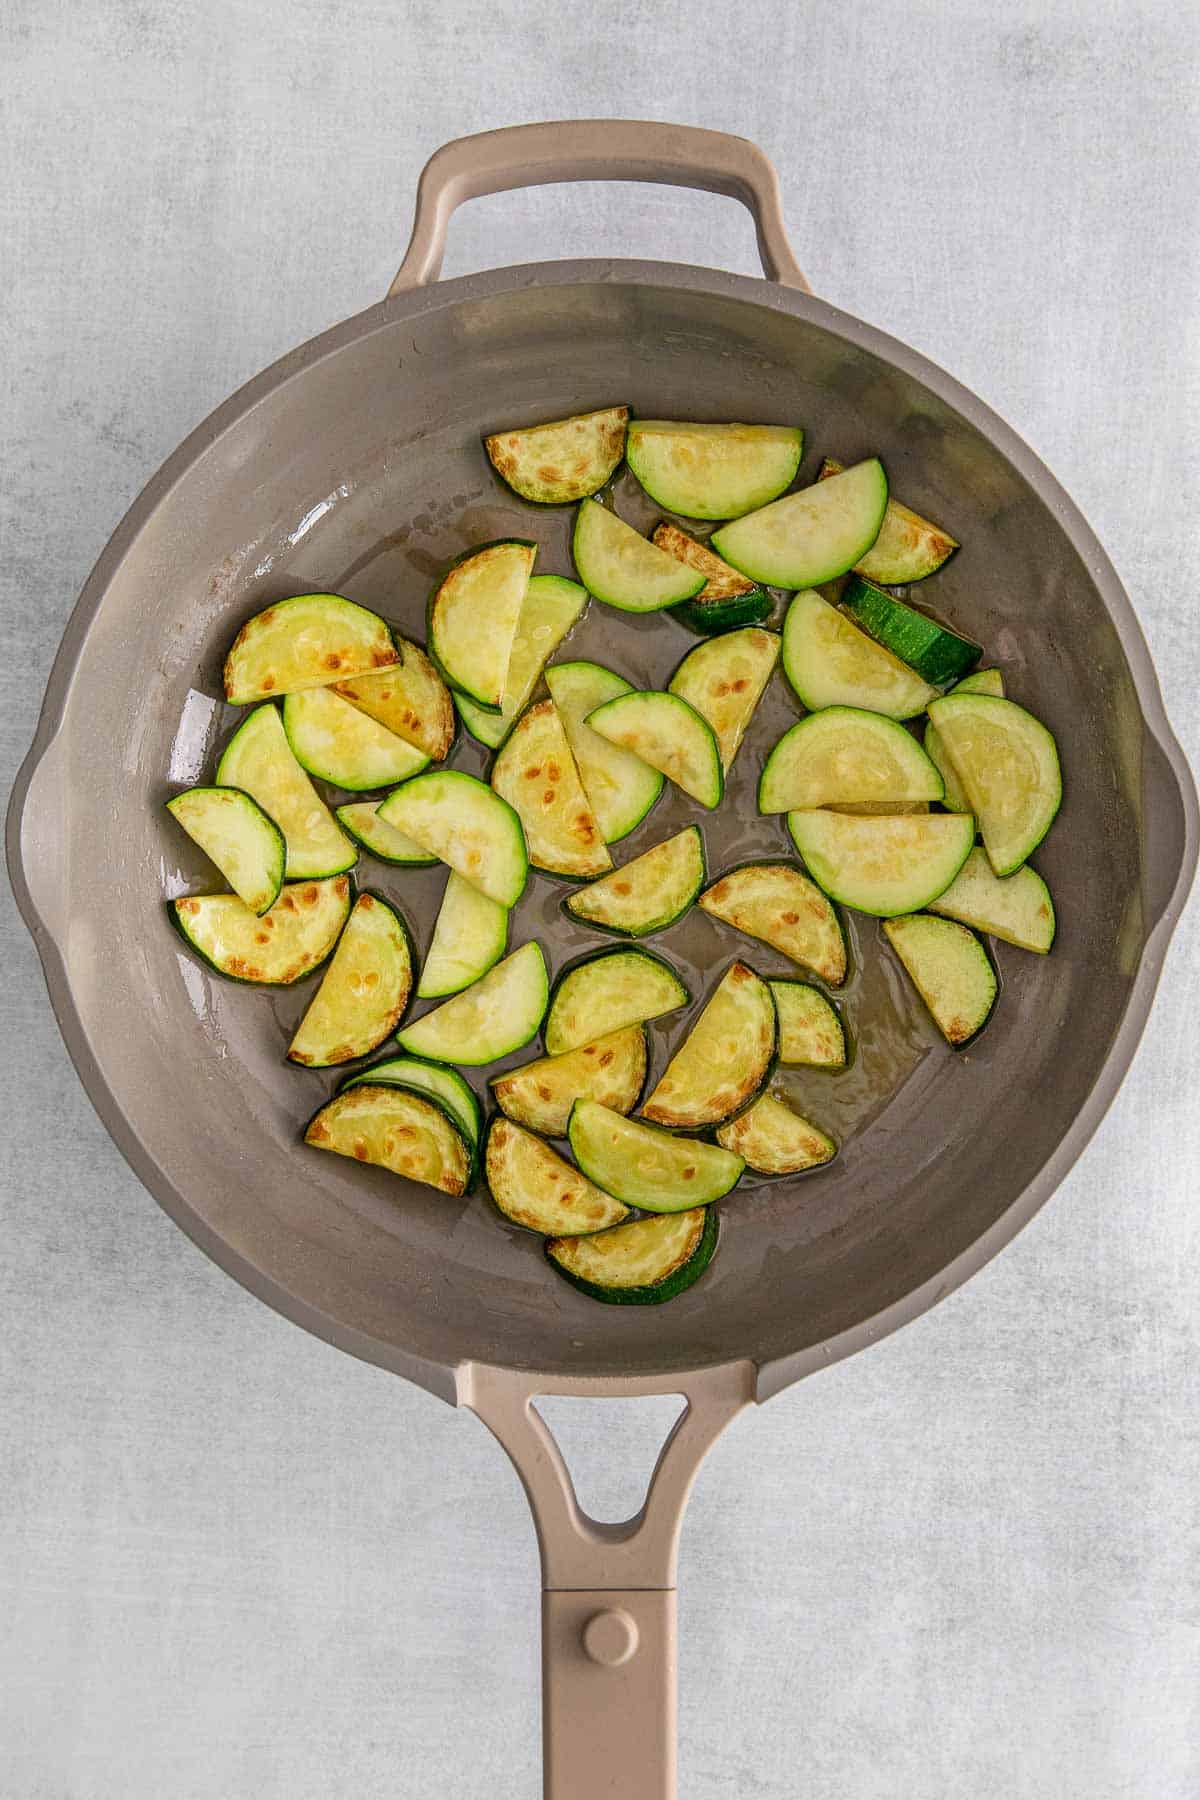 Pan full of cooked zucchini.